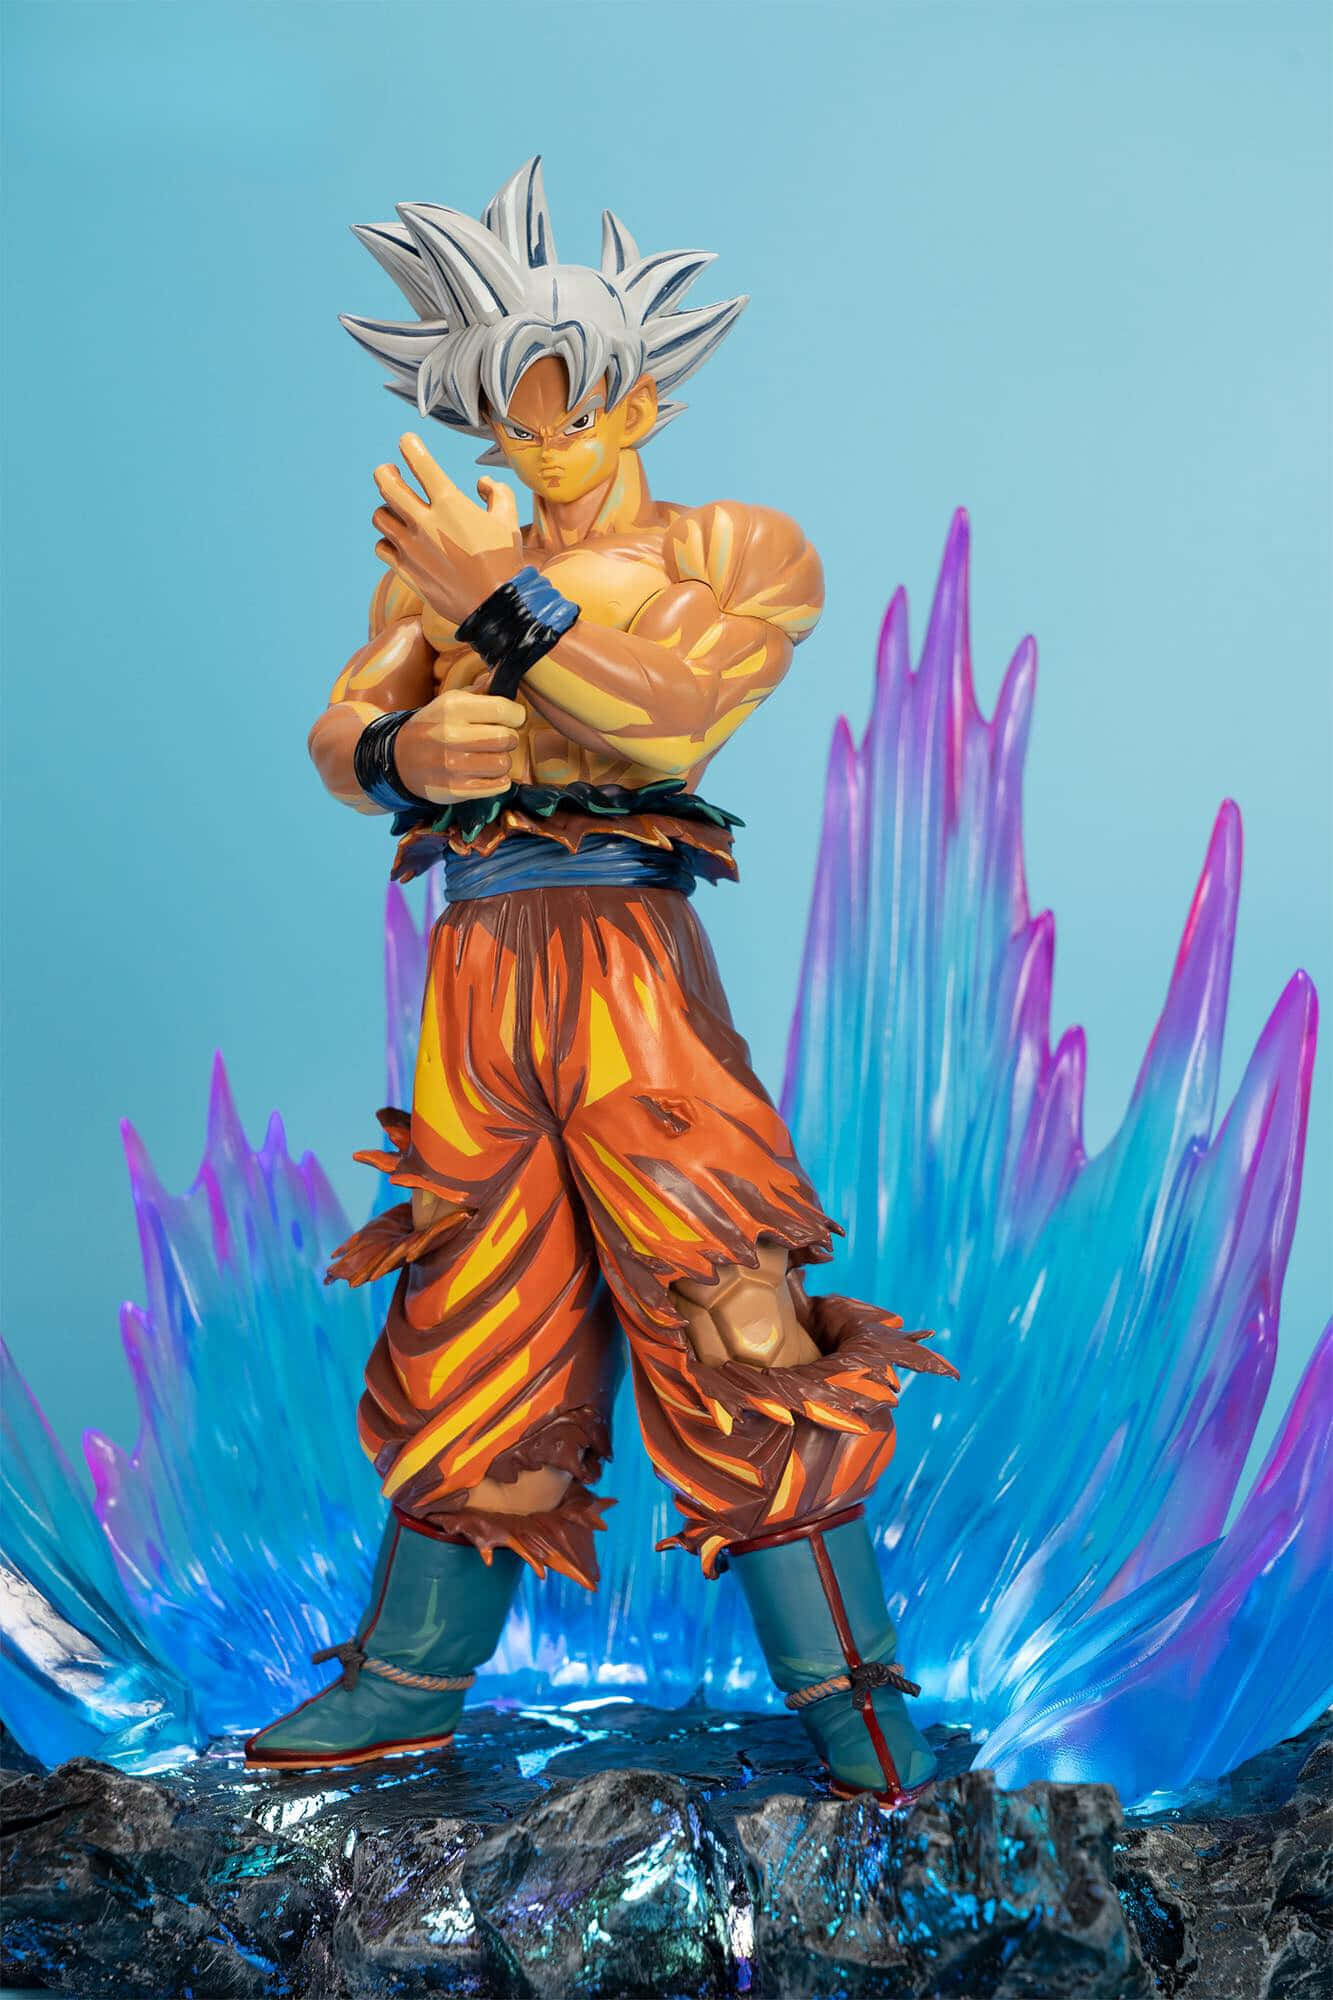 Defying the Inevitable with My Might - Mui Goku Wallpaper